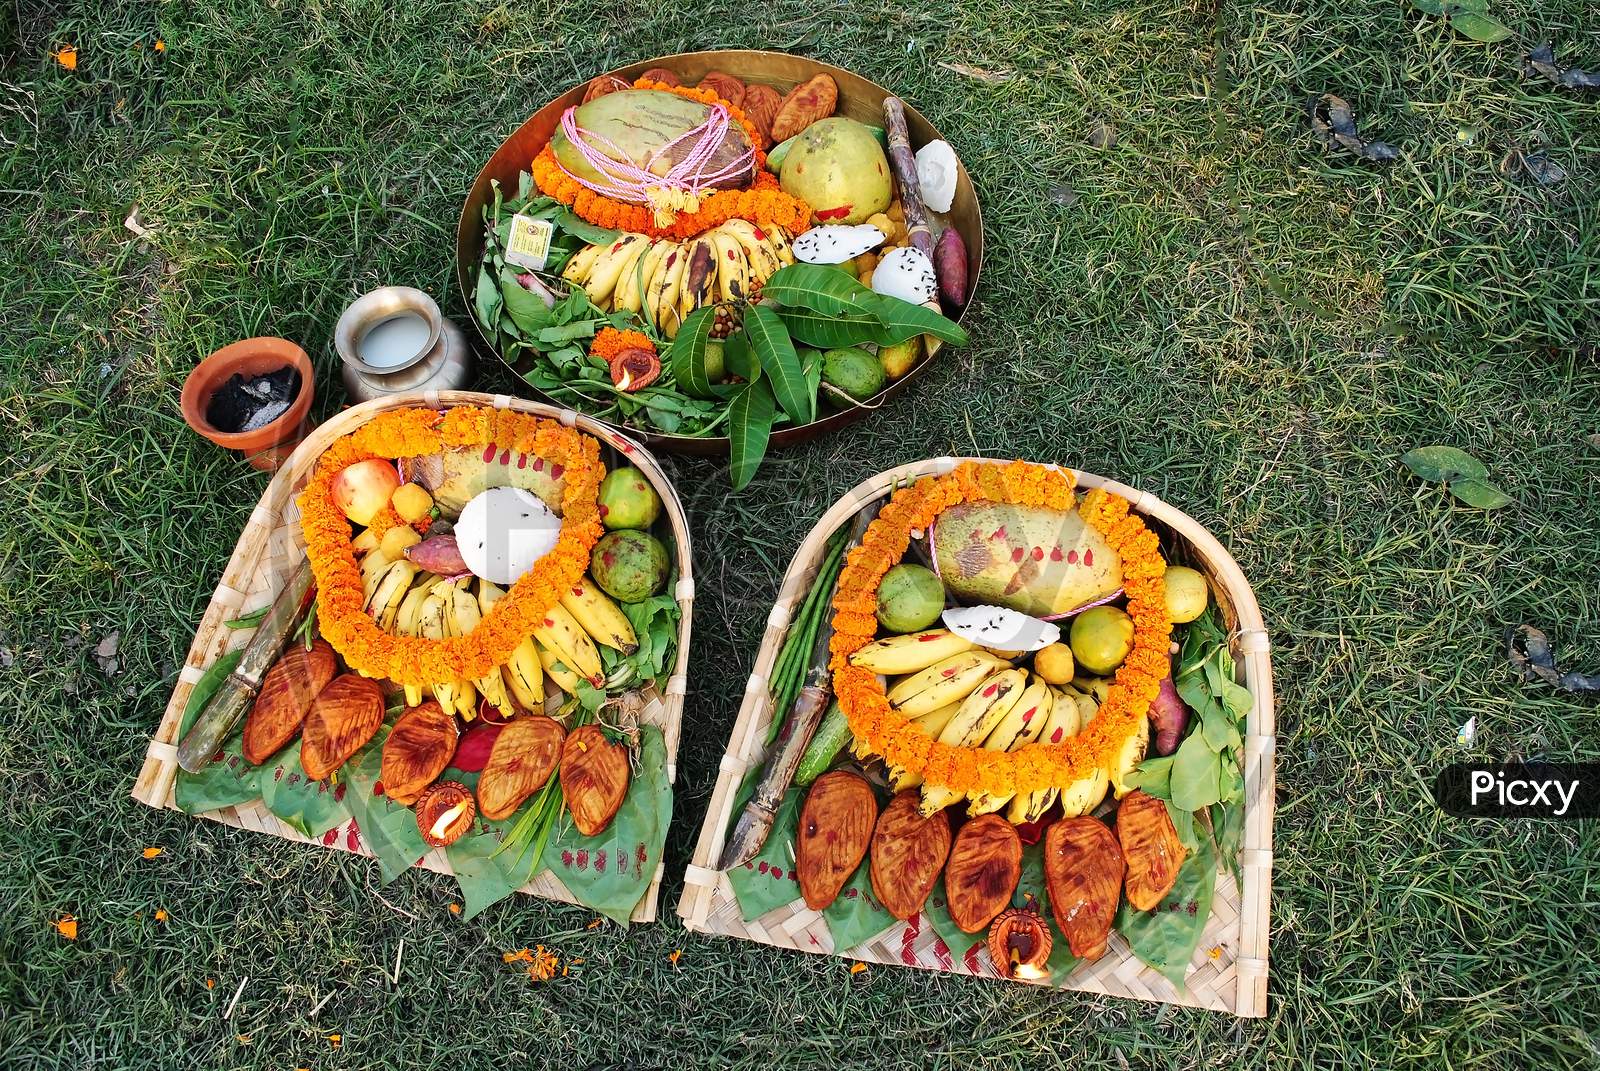 The offering trays of Chat puja festival.